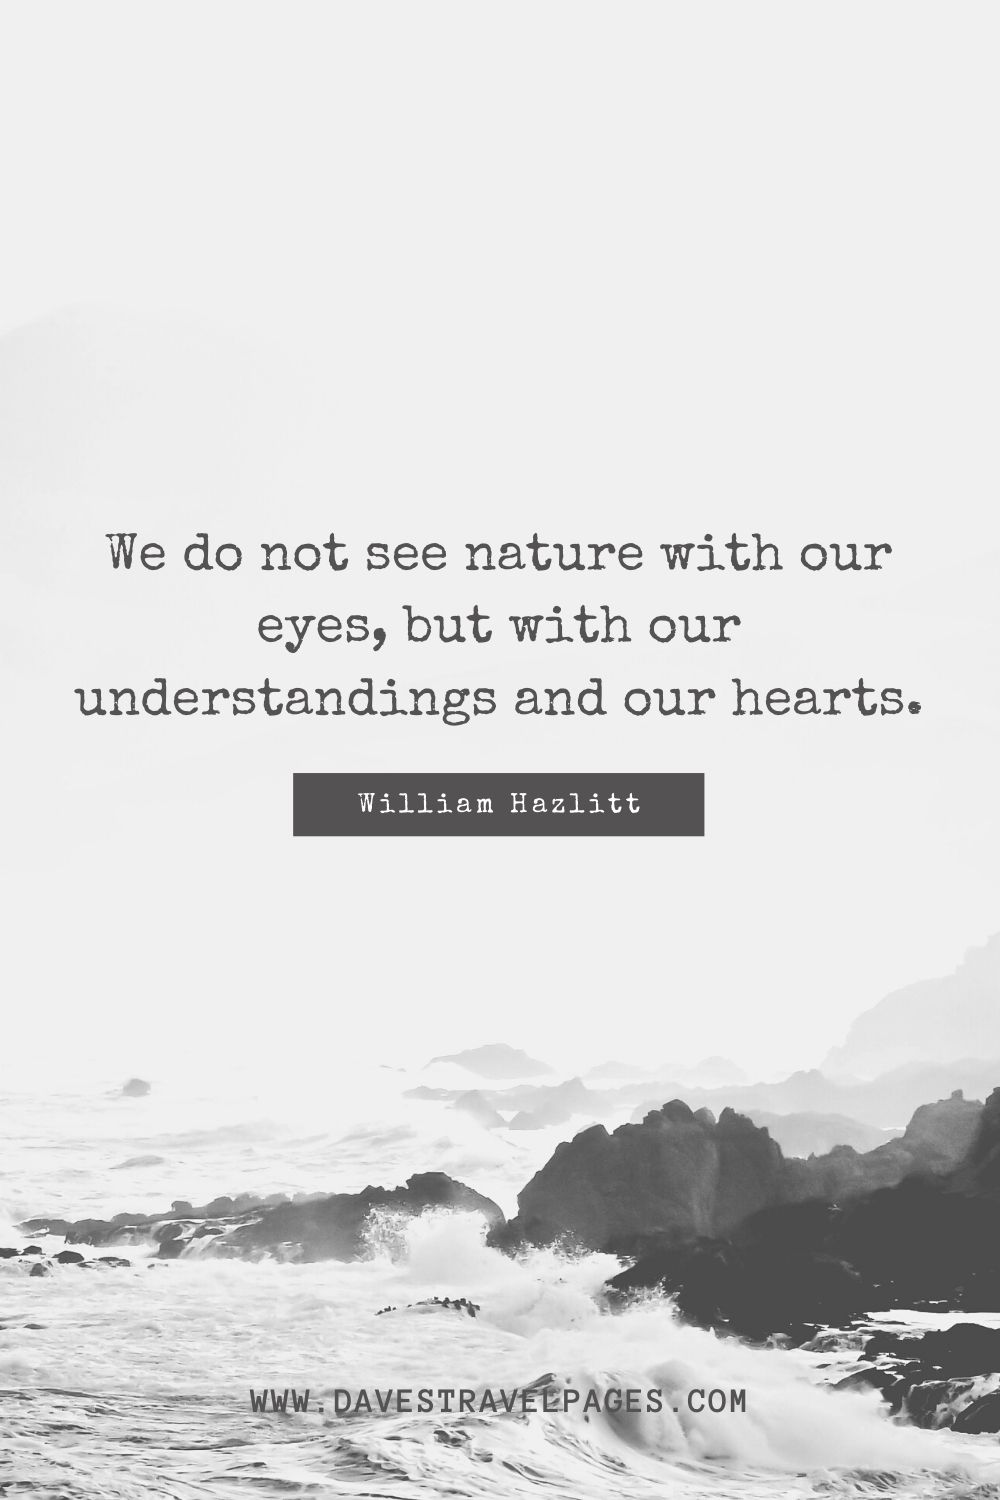 We do not see nature with our eyes, but with our understandings and our hearts.